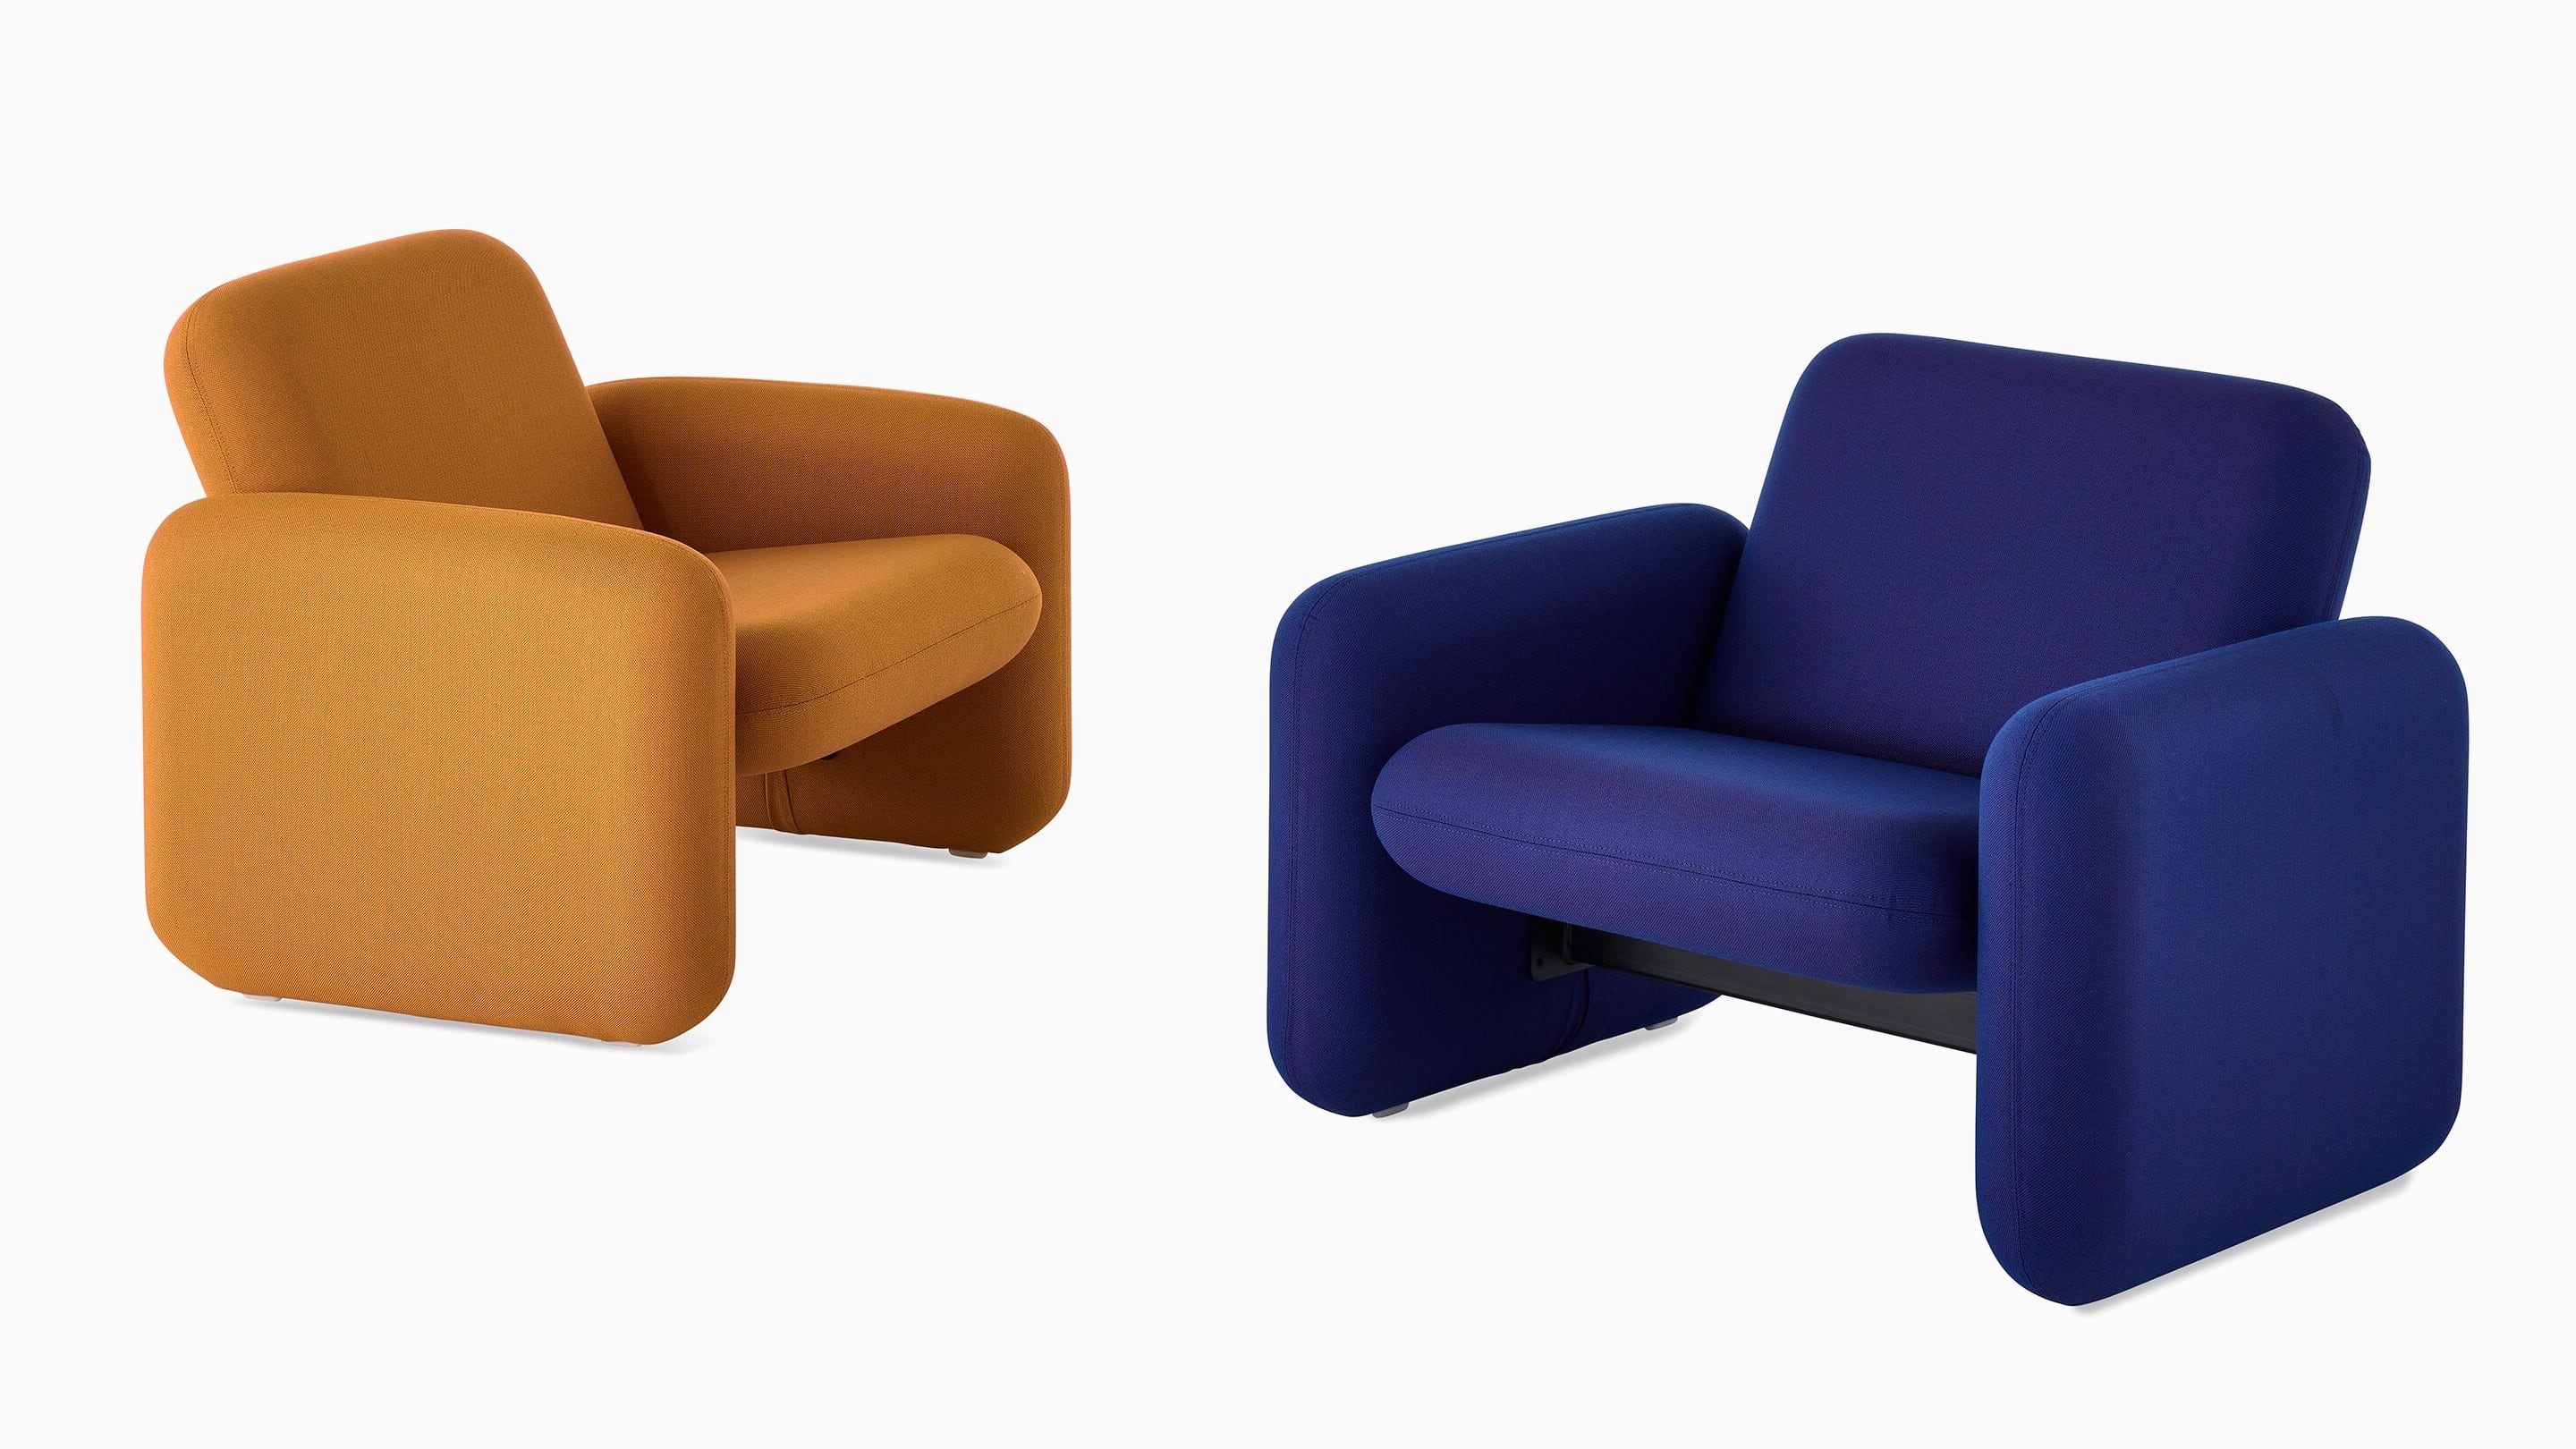 Two Wilkes Modular Sofa Group Chairs facing each other at an angle. The chair on the left is dark yellow and the chair on the right is blue.